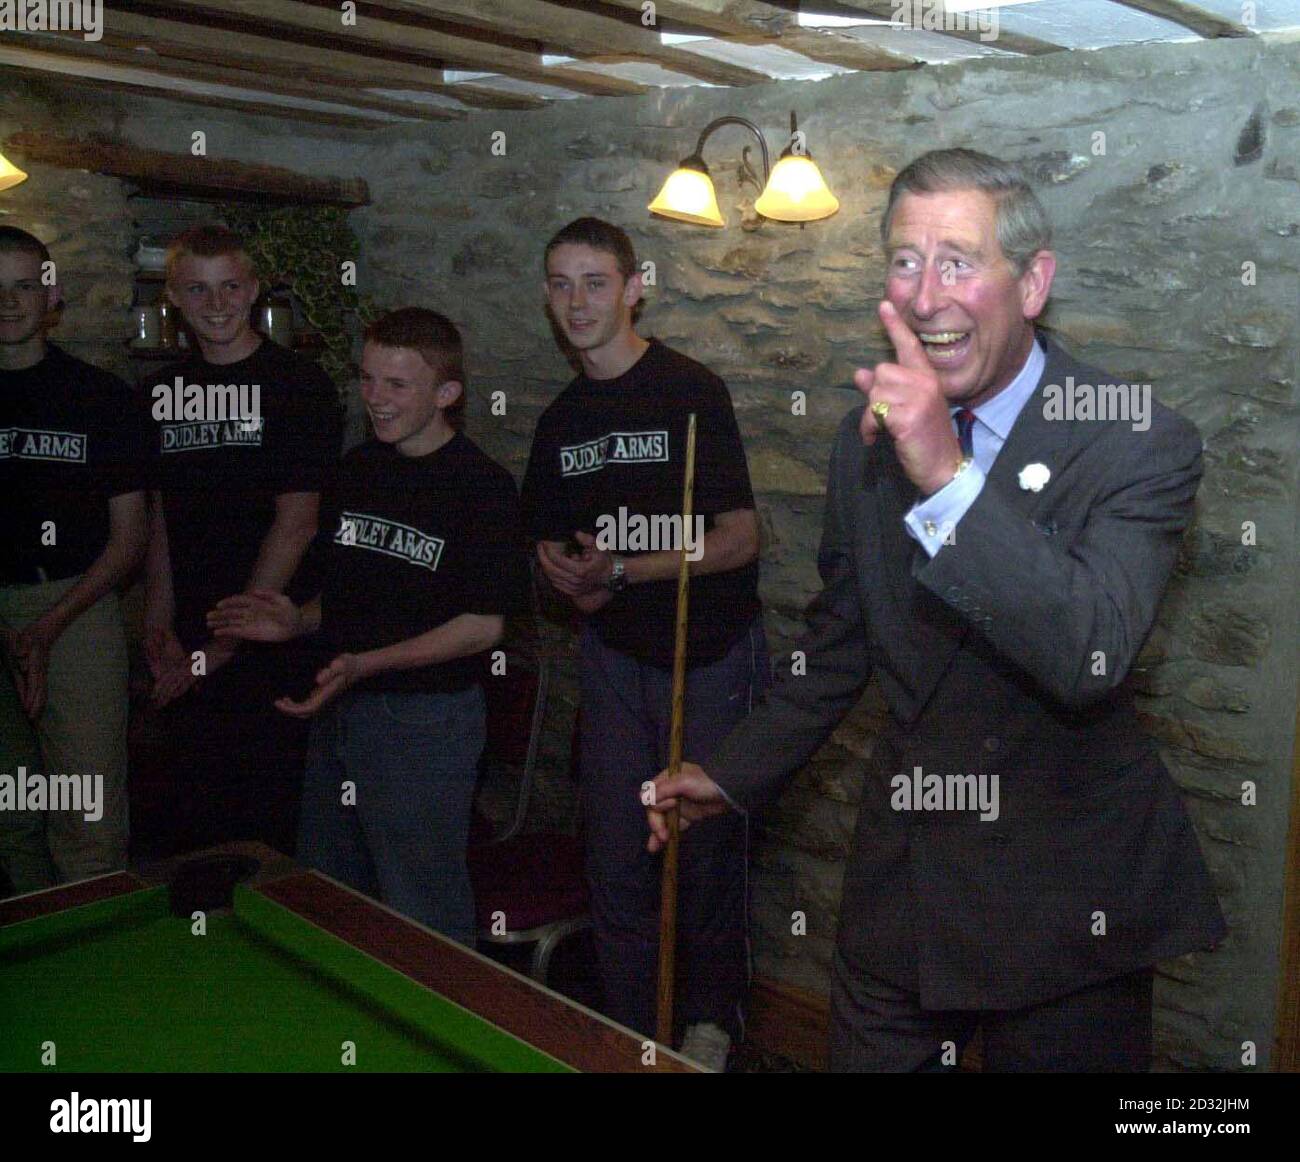 The Prince of Wales, Prince Charles, celebrates potting a ball in the Dudley Arms pub during his visit to Llandrillo in north Wales. Stock Photo